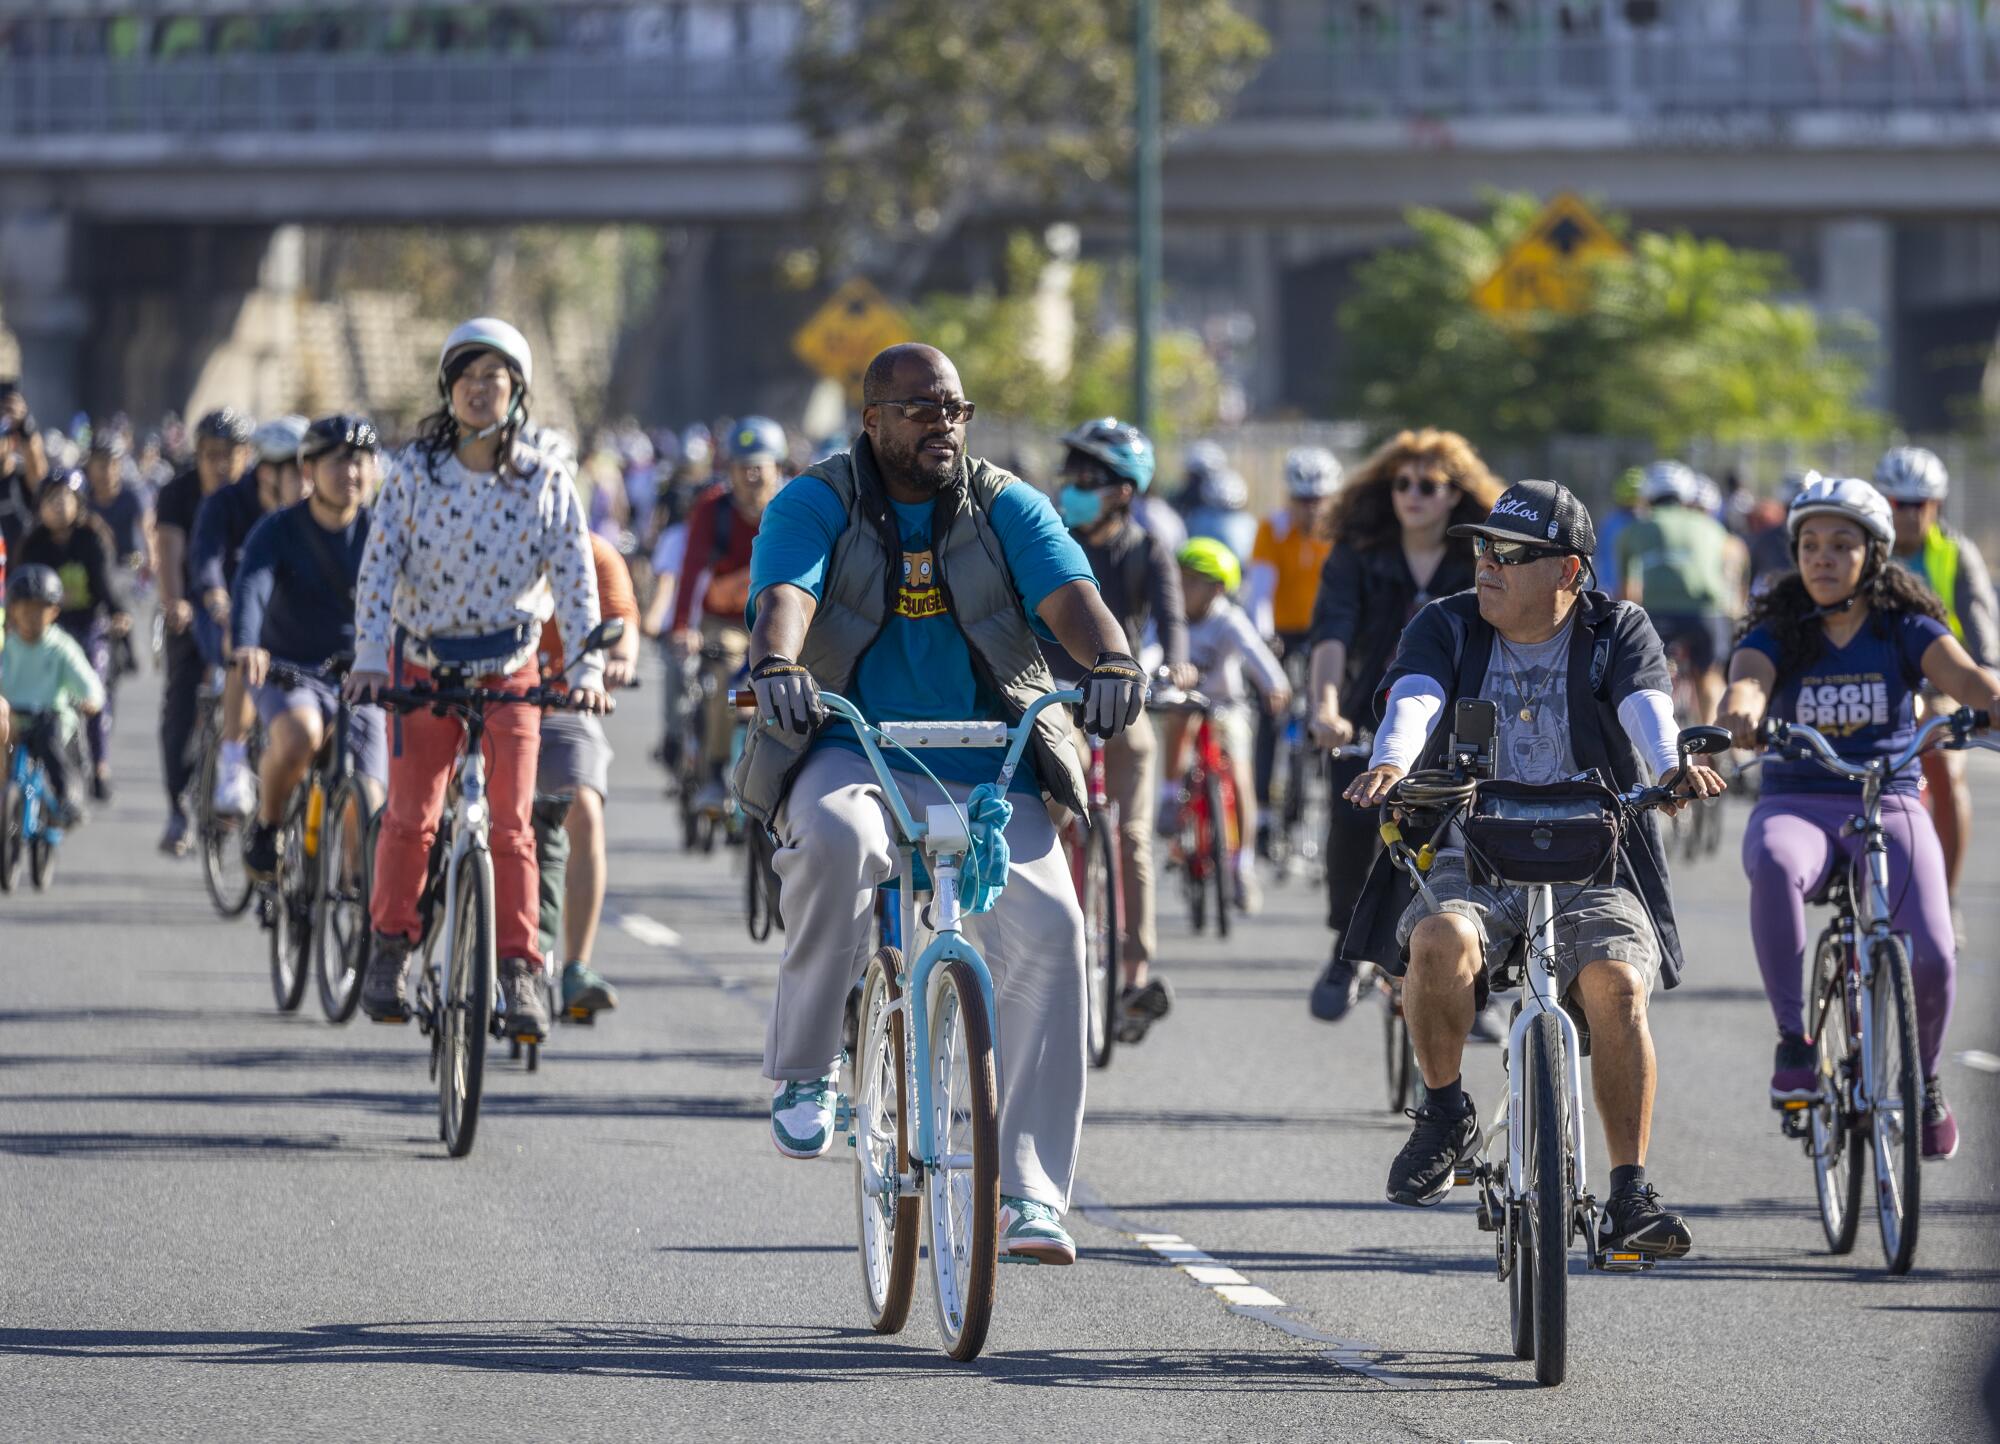 Thousands of bicyclists, rollerbladers, skateboarders, walkers and runners enjoy the Arroyo Seco Parkway during ArroyoFest.